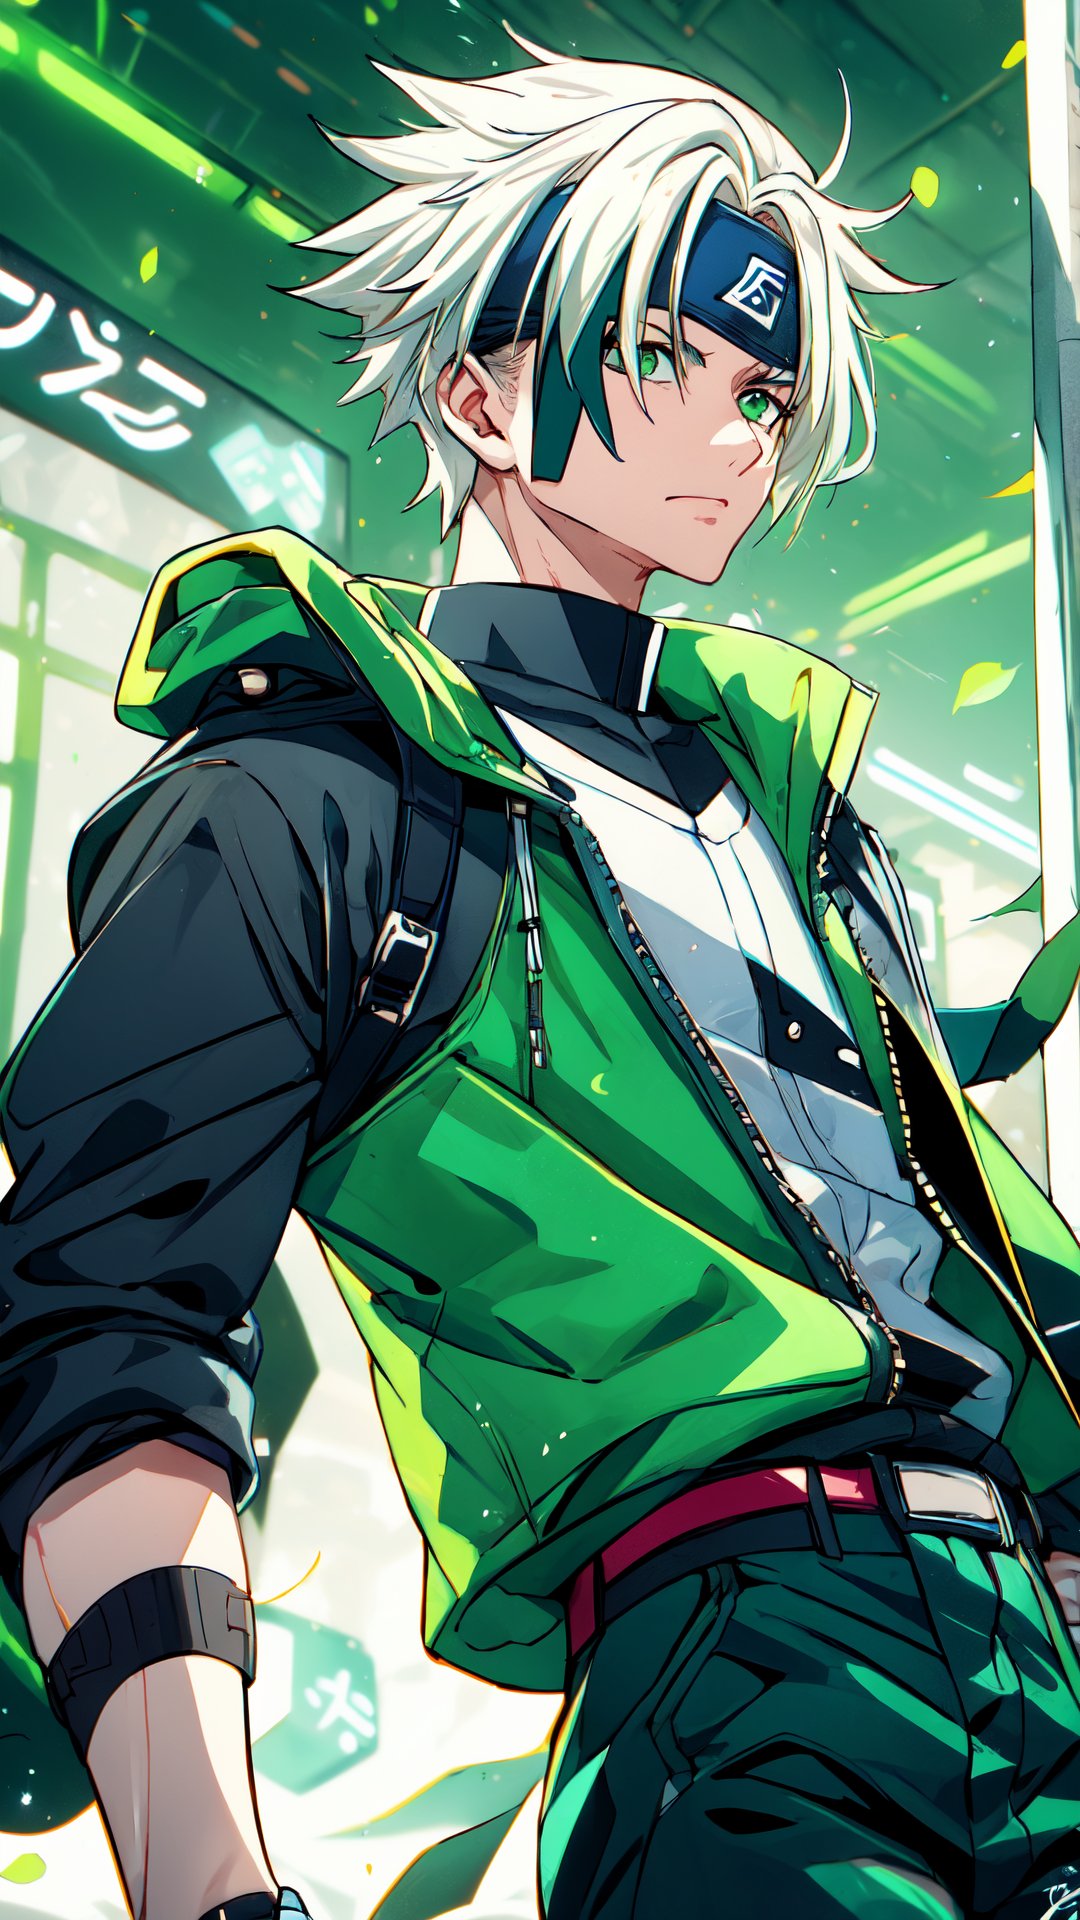 Immerse yourself in the world of Naruto with this prompt: "Illustrate the iconic Naruto anime character Kakashi Hatake, known for his spiky silver hair and enigmatic mask. Picture him wearing an anime-style green T-shirt, green vest, blue pant, adorned with his signature headband. Capture Kakashi standing dynamically in a pose that perfectly encapsulates his character. Encourage artists to create the perfect image of Kakashi Hatake from the Naruto anime, ensuring meticulous attention to detail and faithful representation of this beloved character in a visually captivating composition.,clothing,Zombie,1 girl,Cyberpunk,Matrix